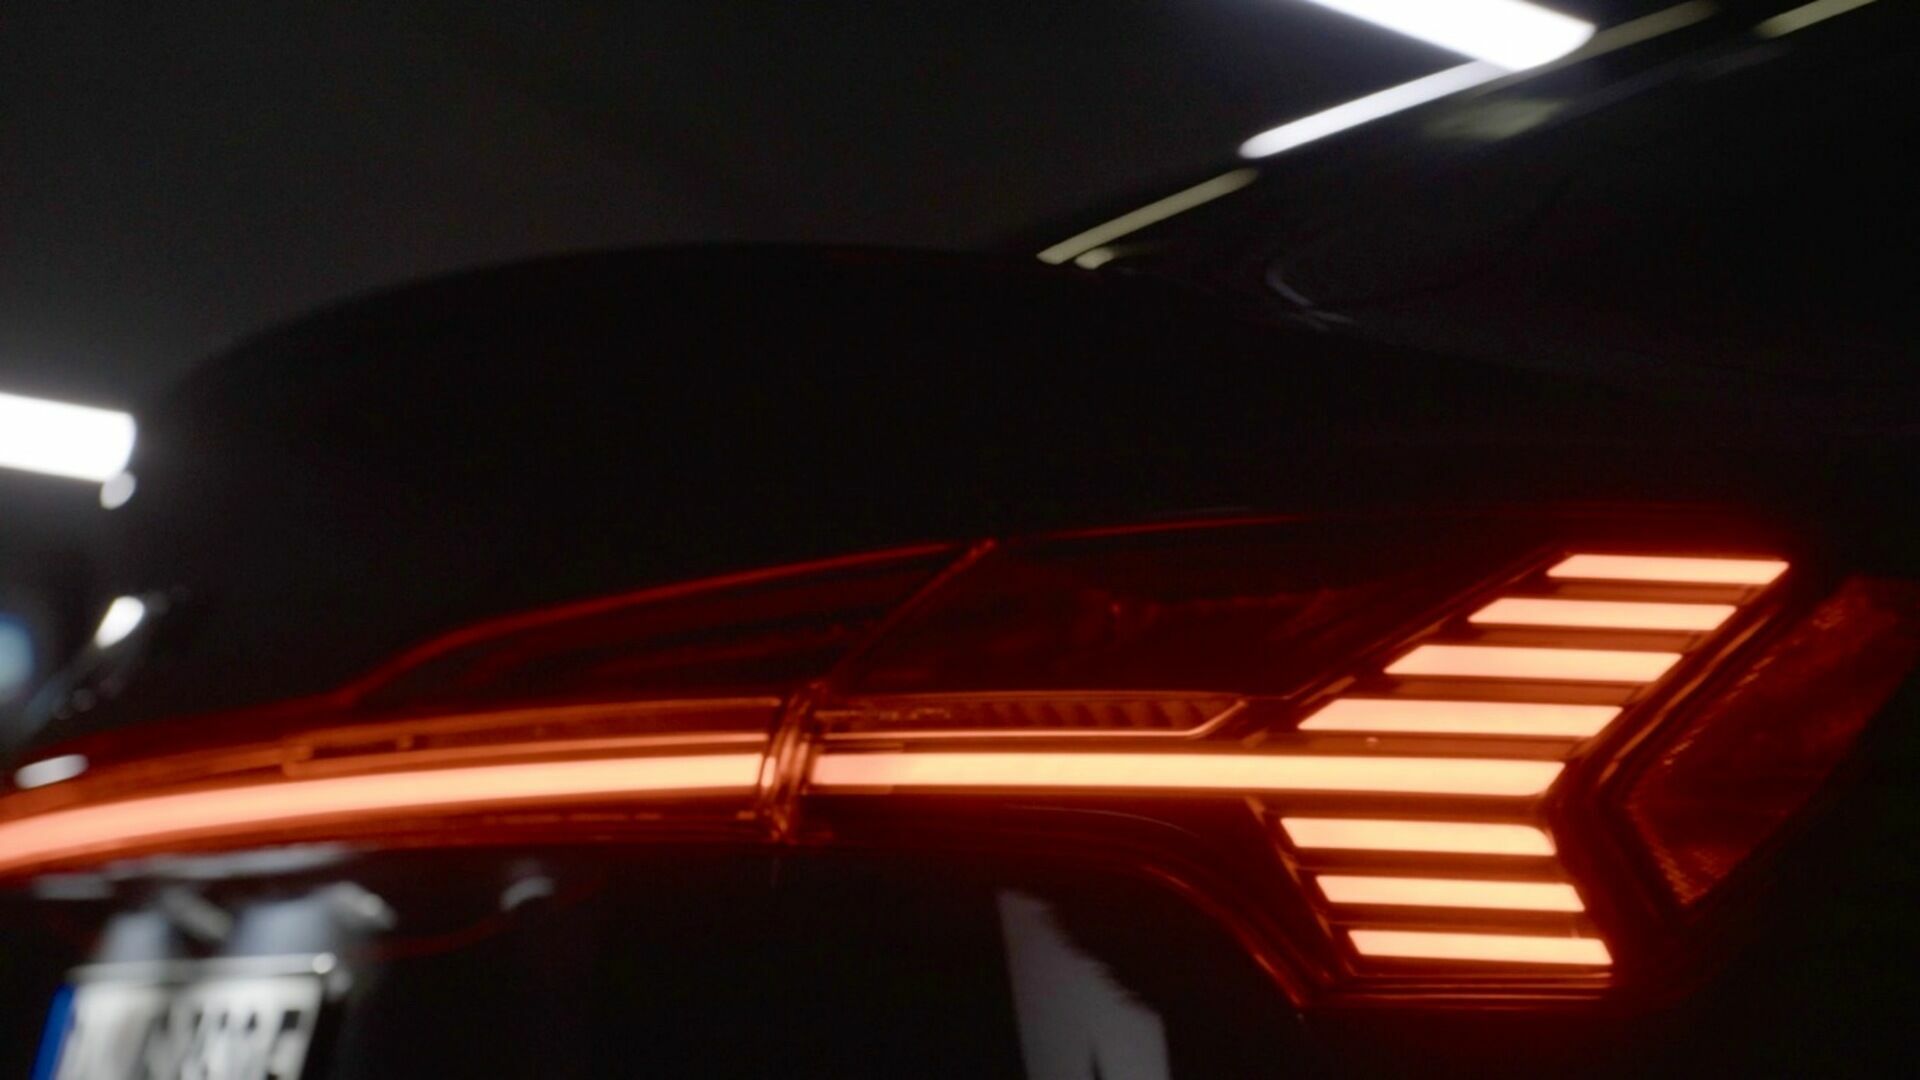 Teaser: Audi e-tron Sportback to be unveiled in LA